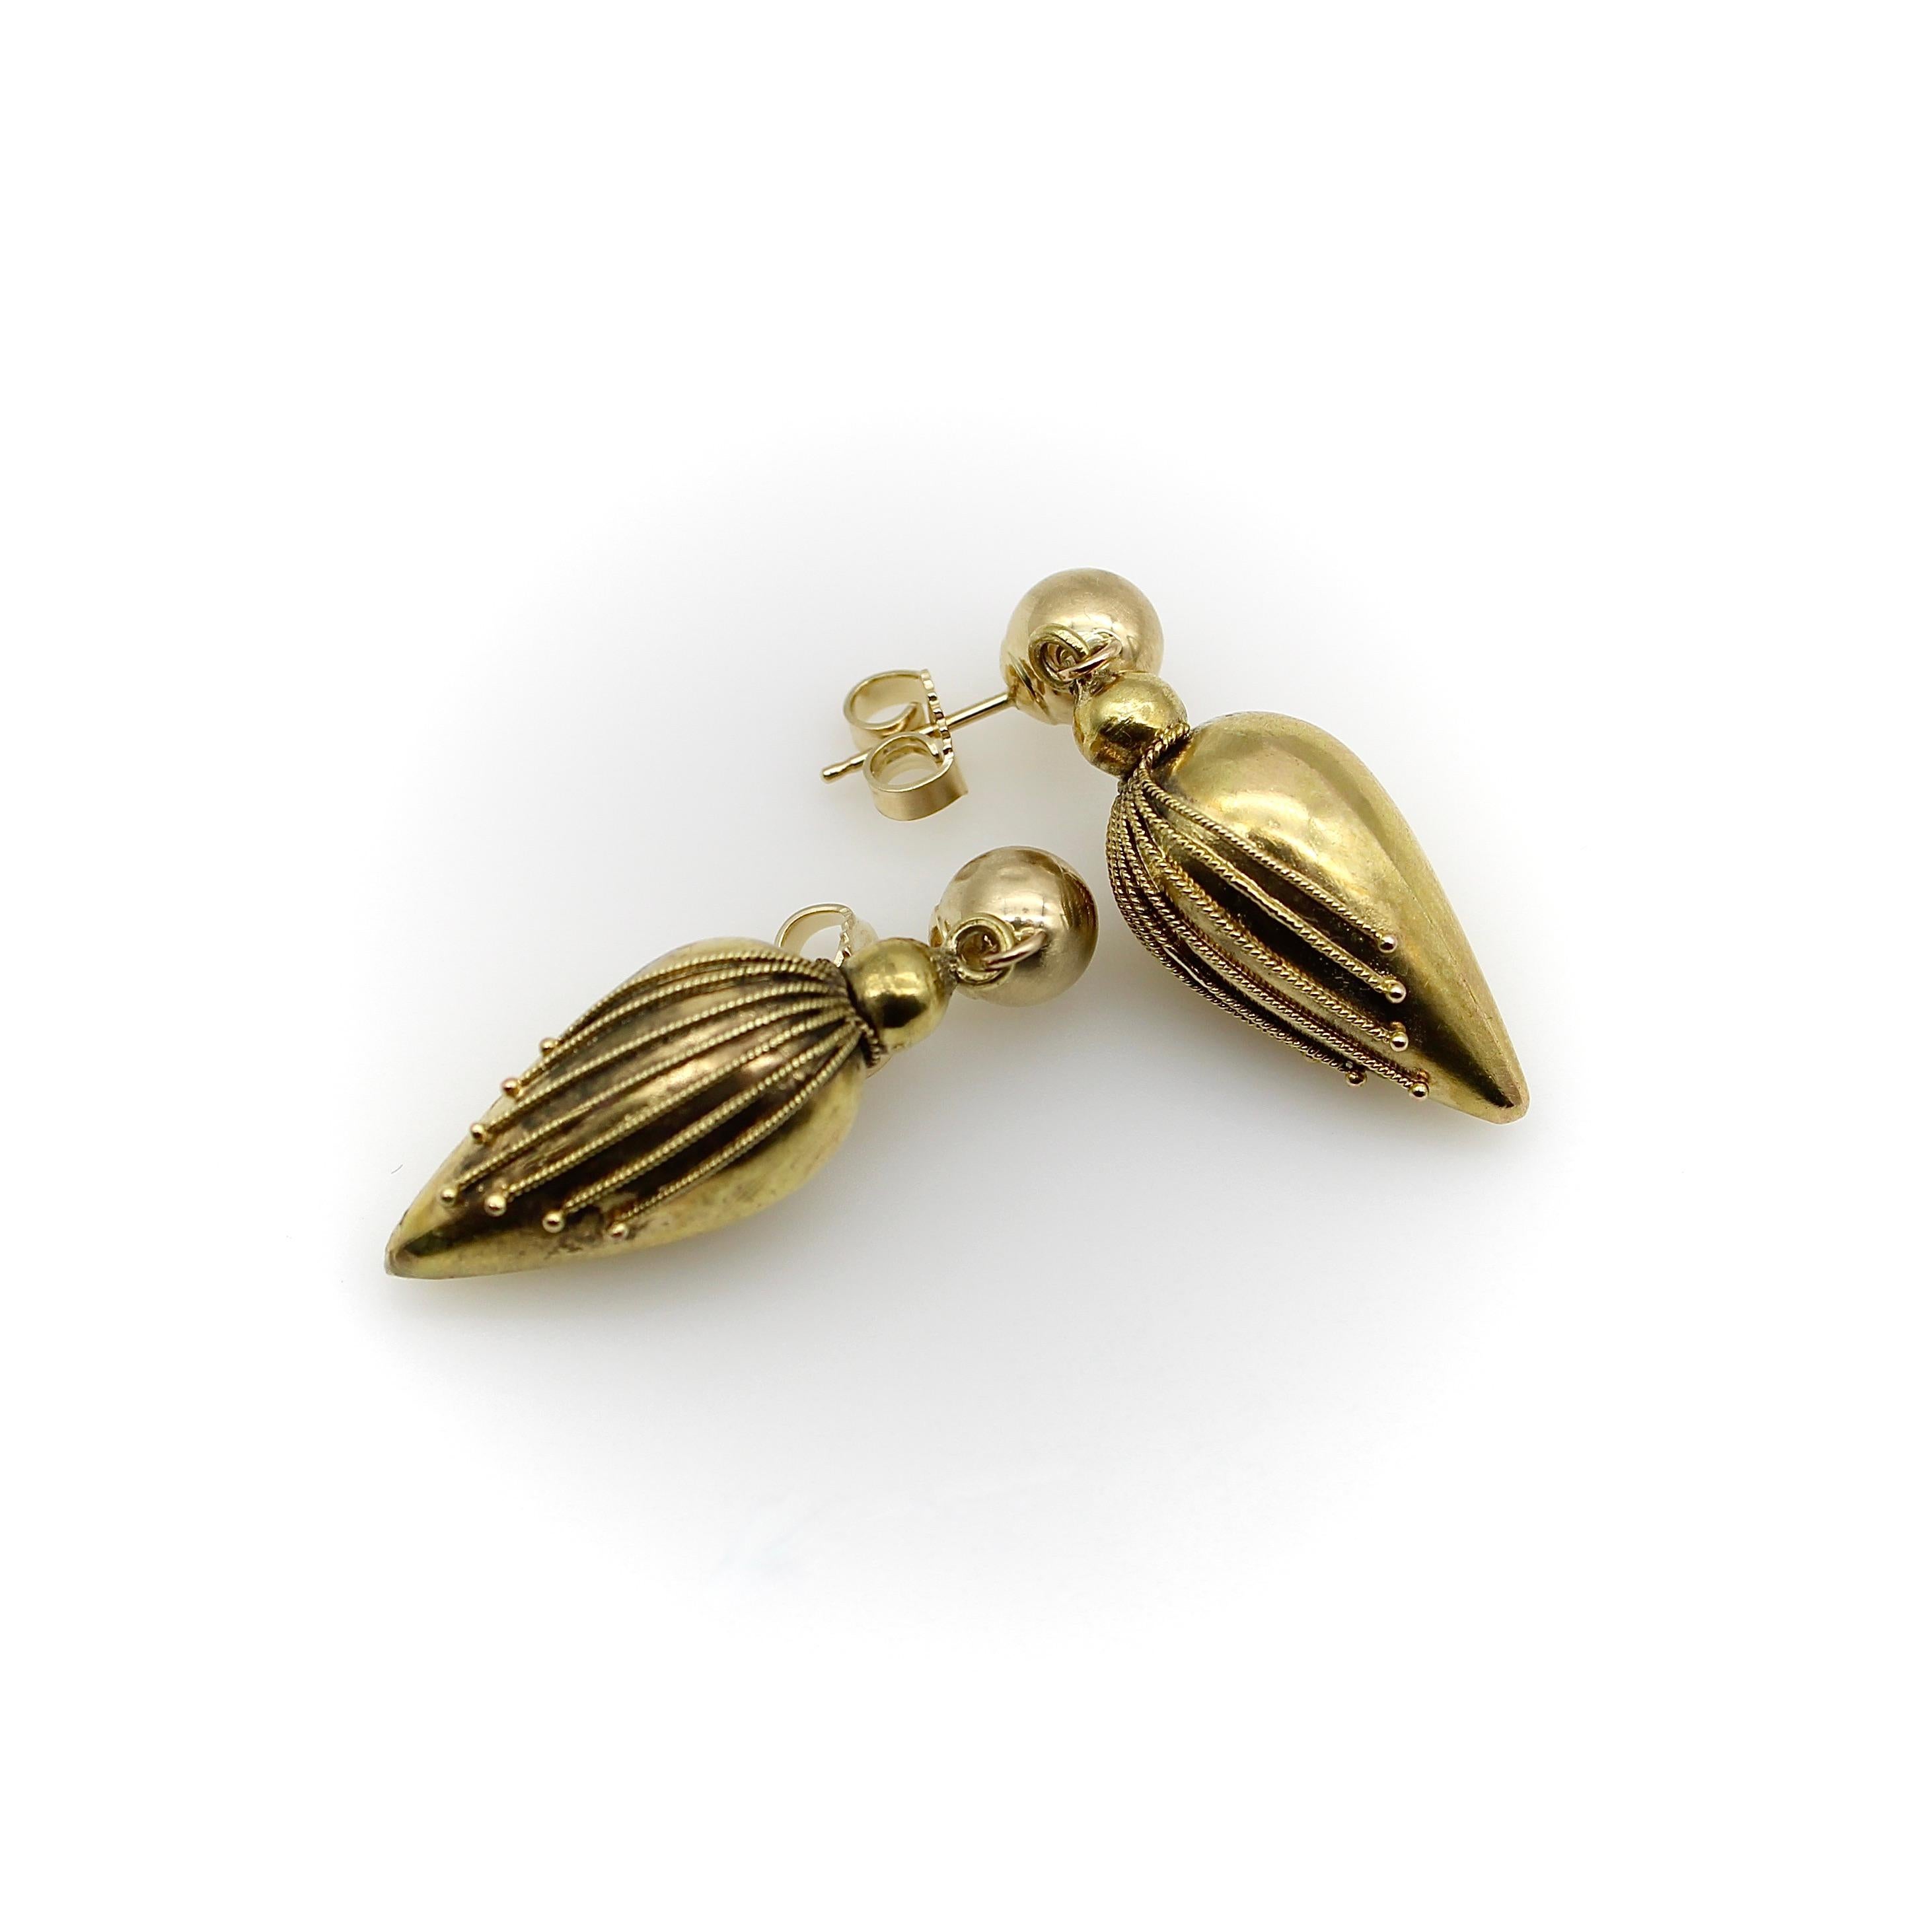 Beautiful torpedo-shaped drops are suspended from classic balls in this wonderful pair of Etruscan Revival 14k gold earrings. The fronts of the torpedos are decorated with twisted wires of varying lengths that create a chevron pattern. Each of the